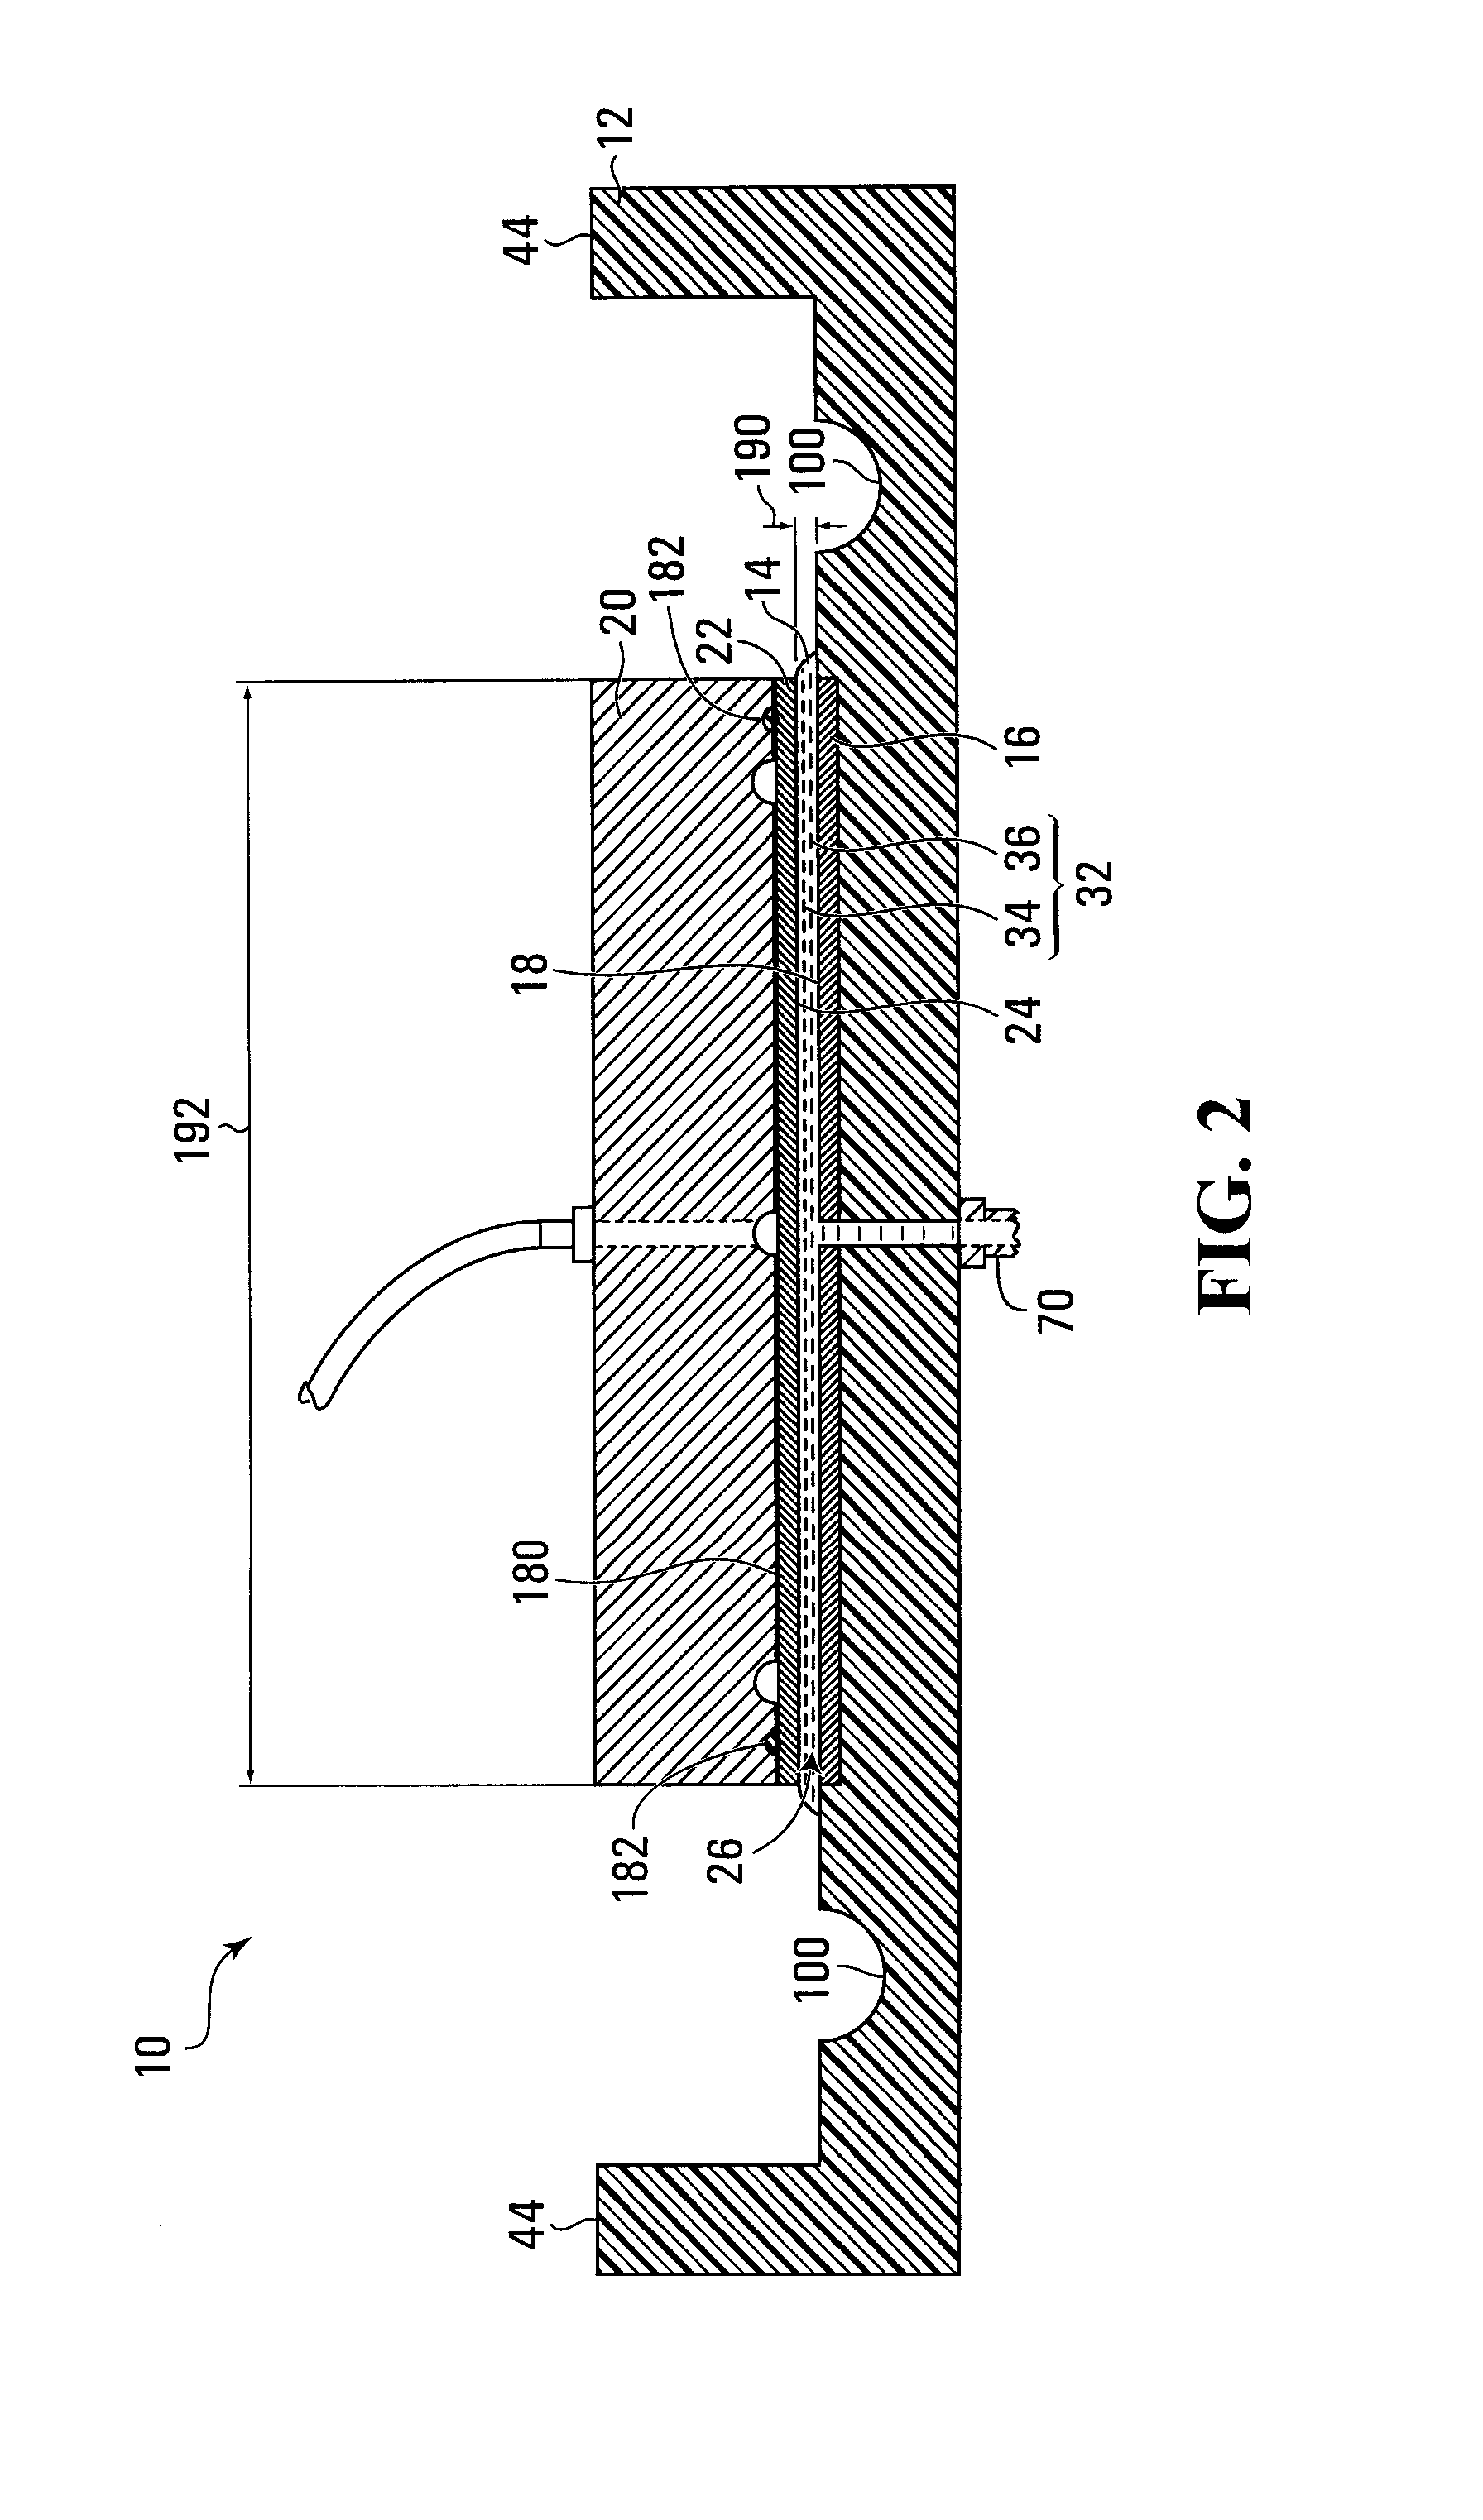 Forming an oxide layer on a flat conductive surface